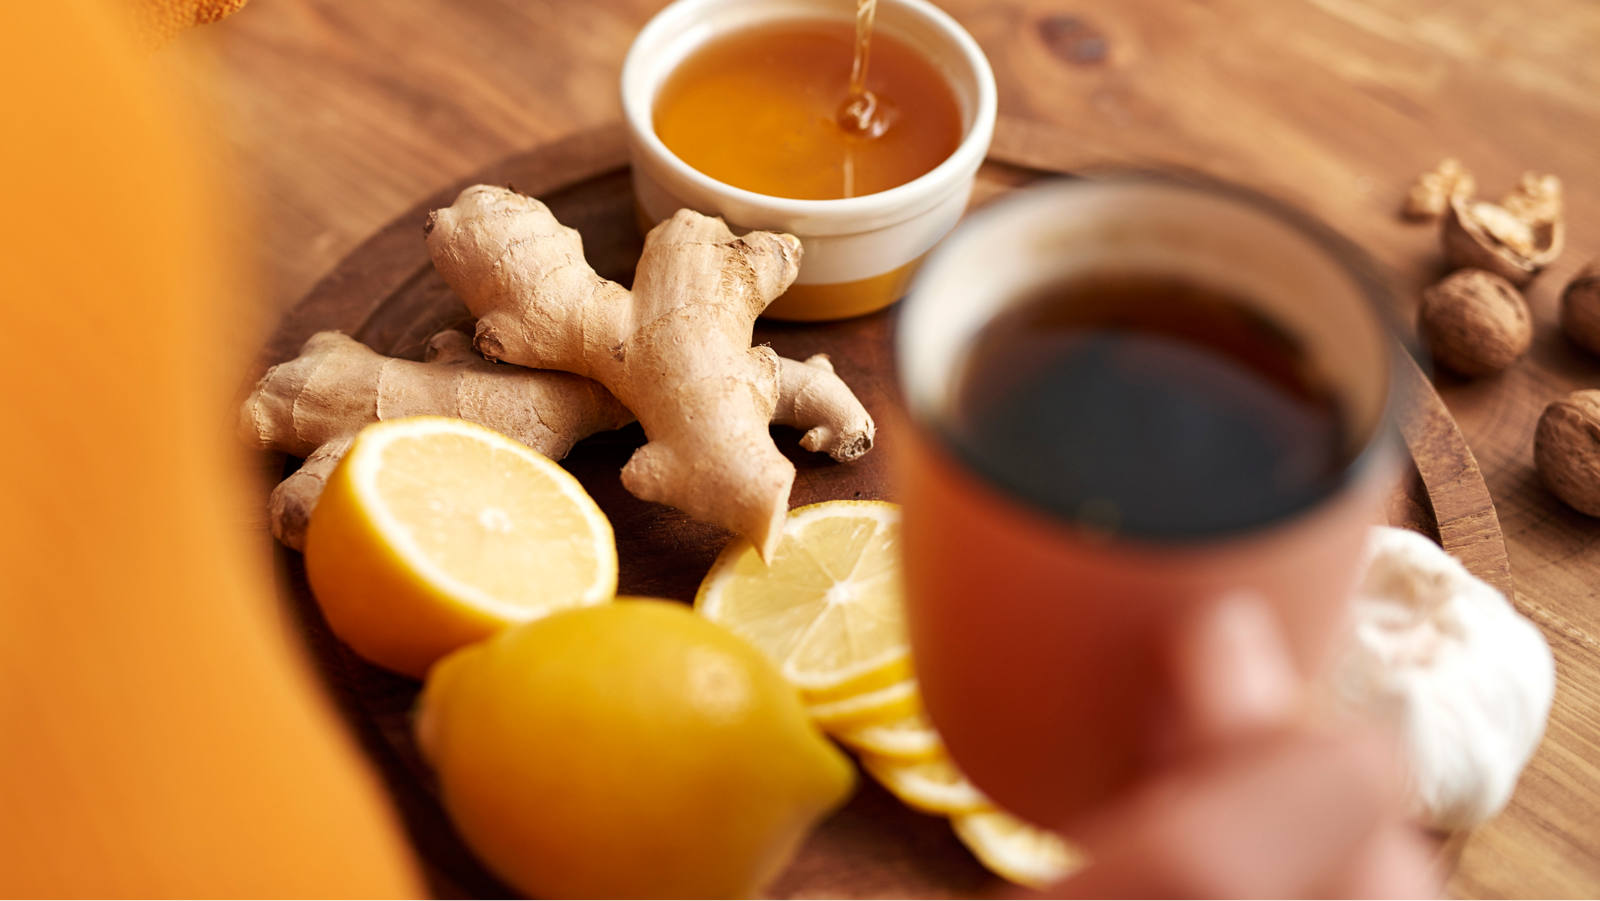 A dry cough: the best household remedies